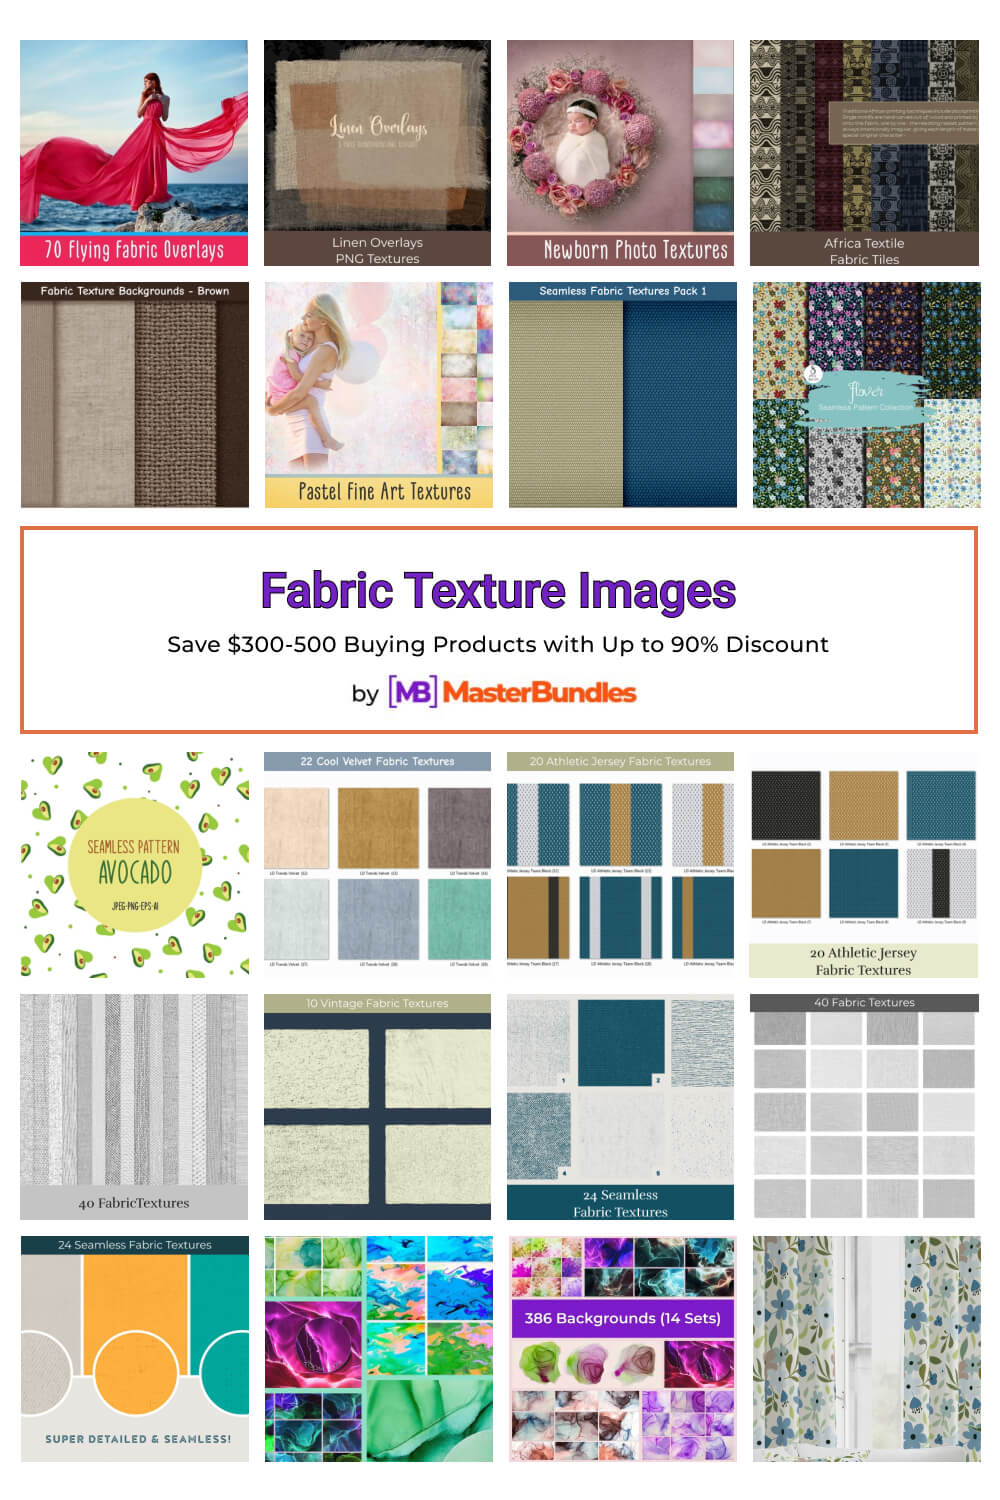 fabric texture images pinterest image.